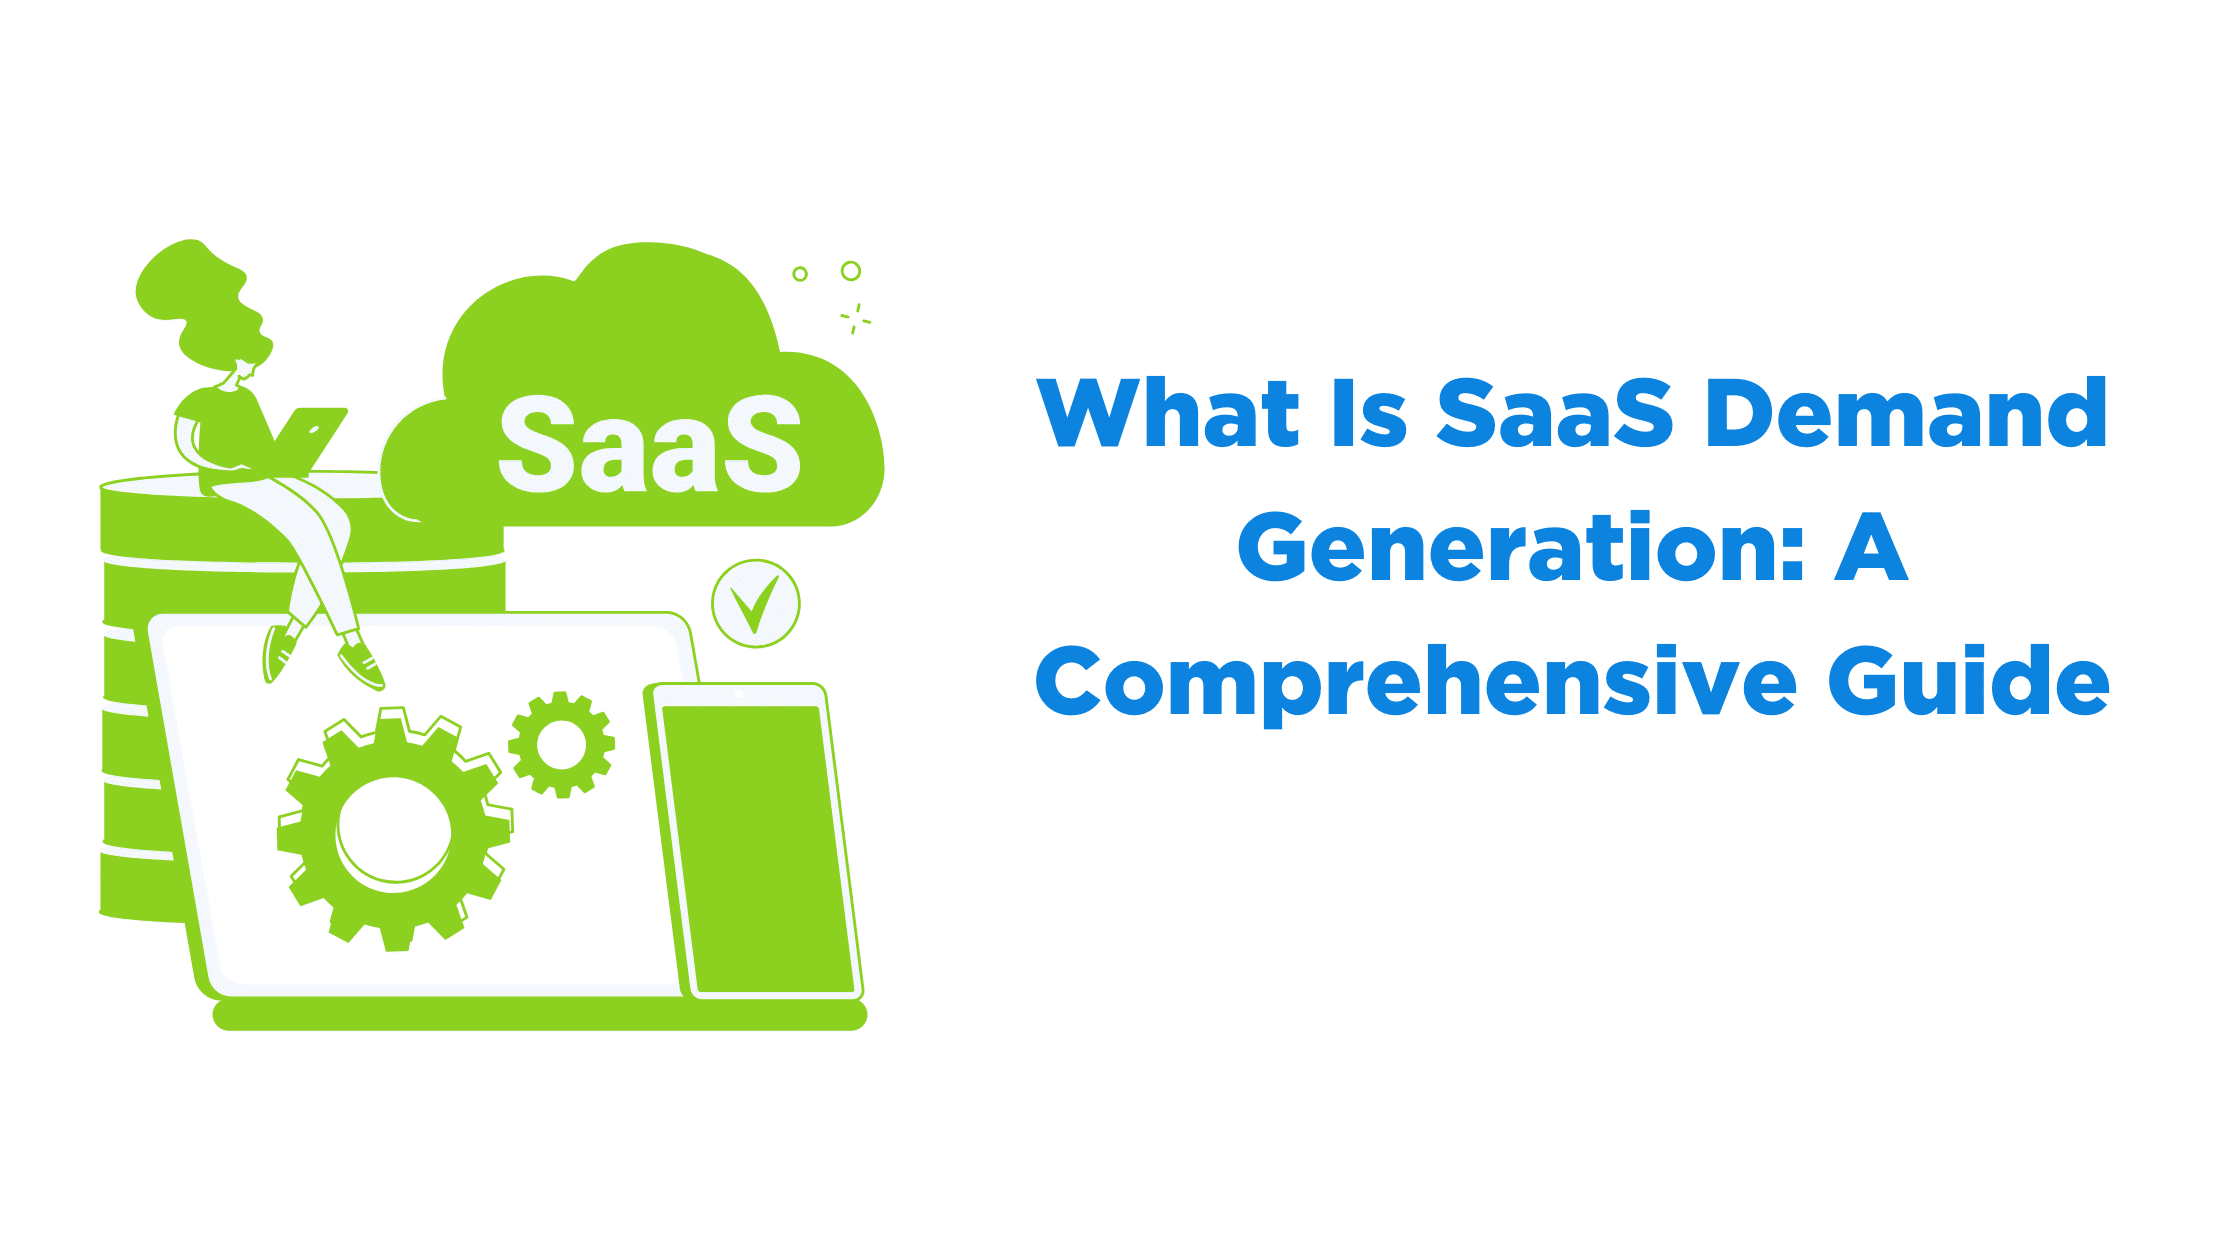 What Is SaaS Demand Generation: A Comprehensive Guide